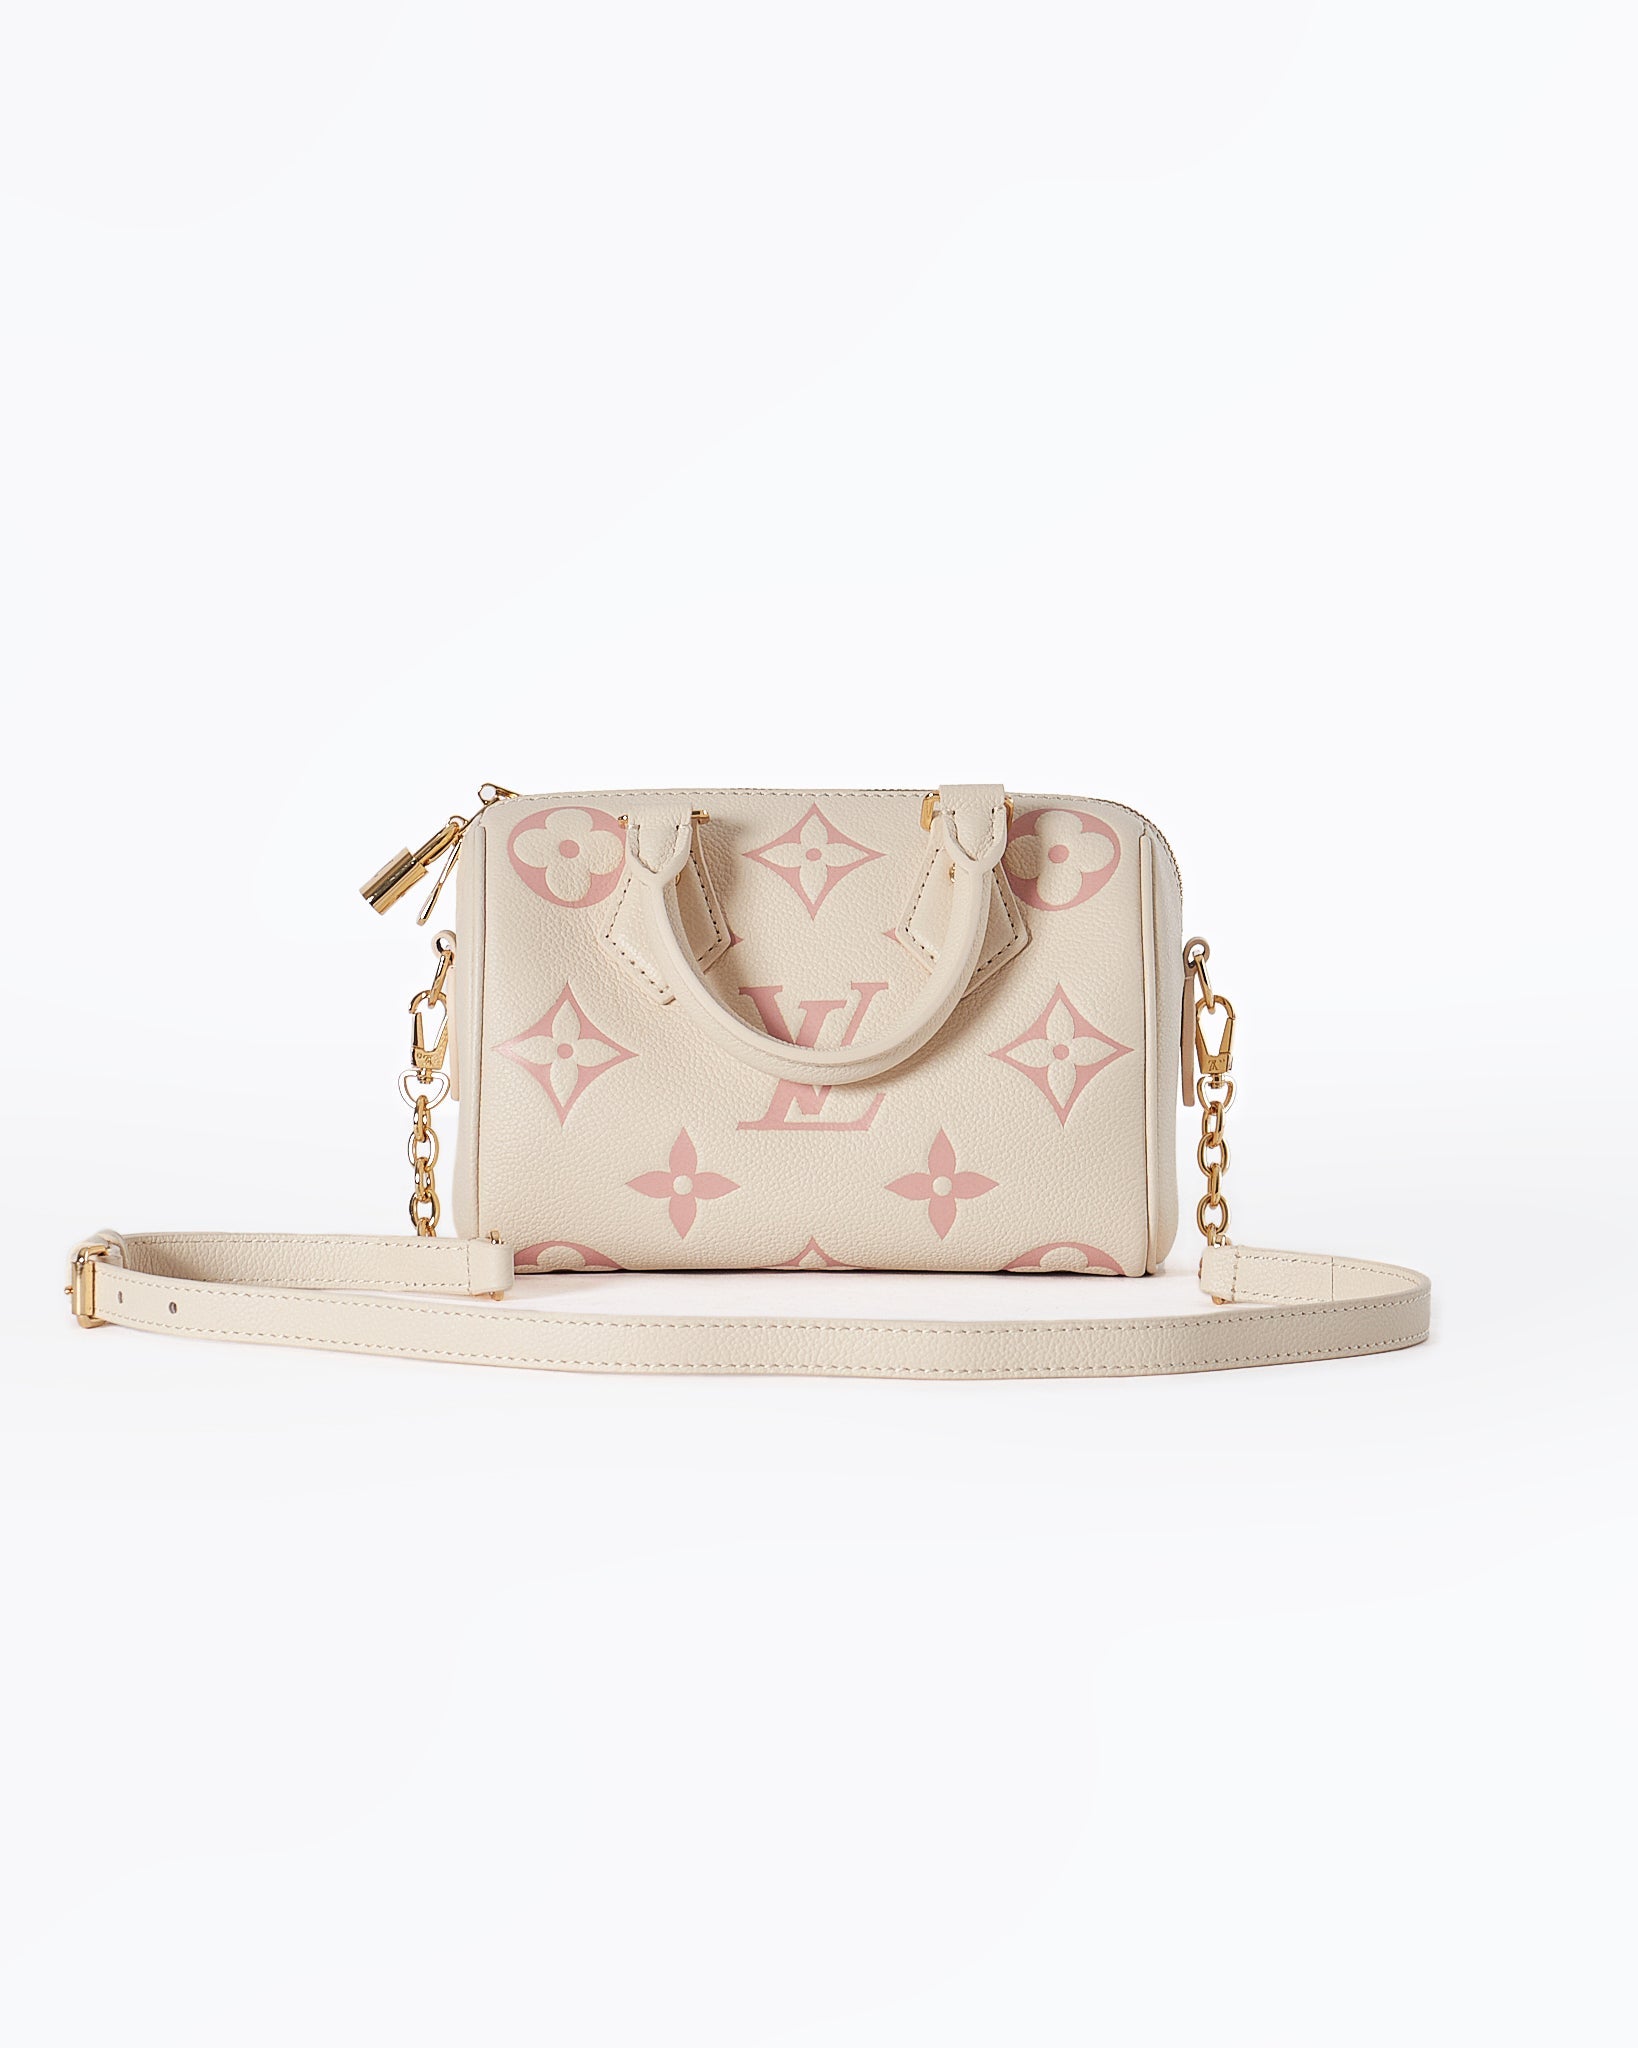 LV Cylinder Lady Bag 279 - MOI OUTFIT